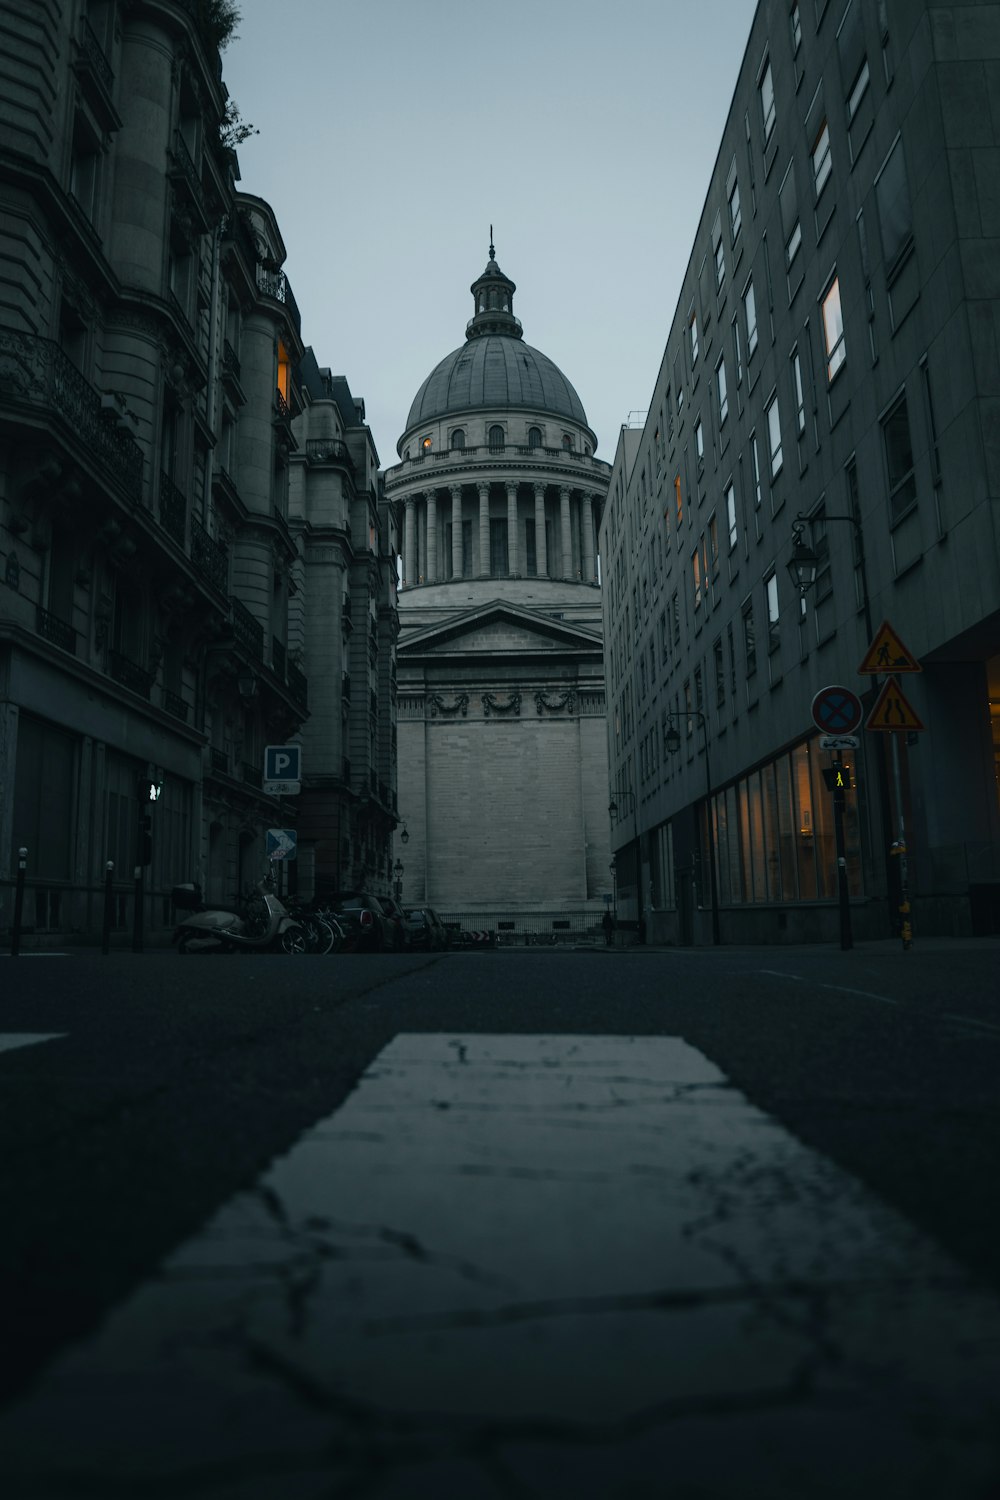 a building with a dome in the middle of a street